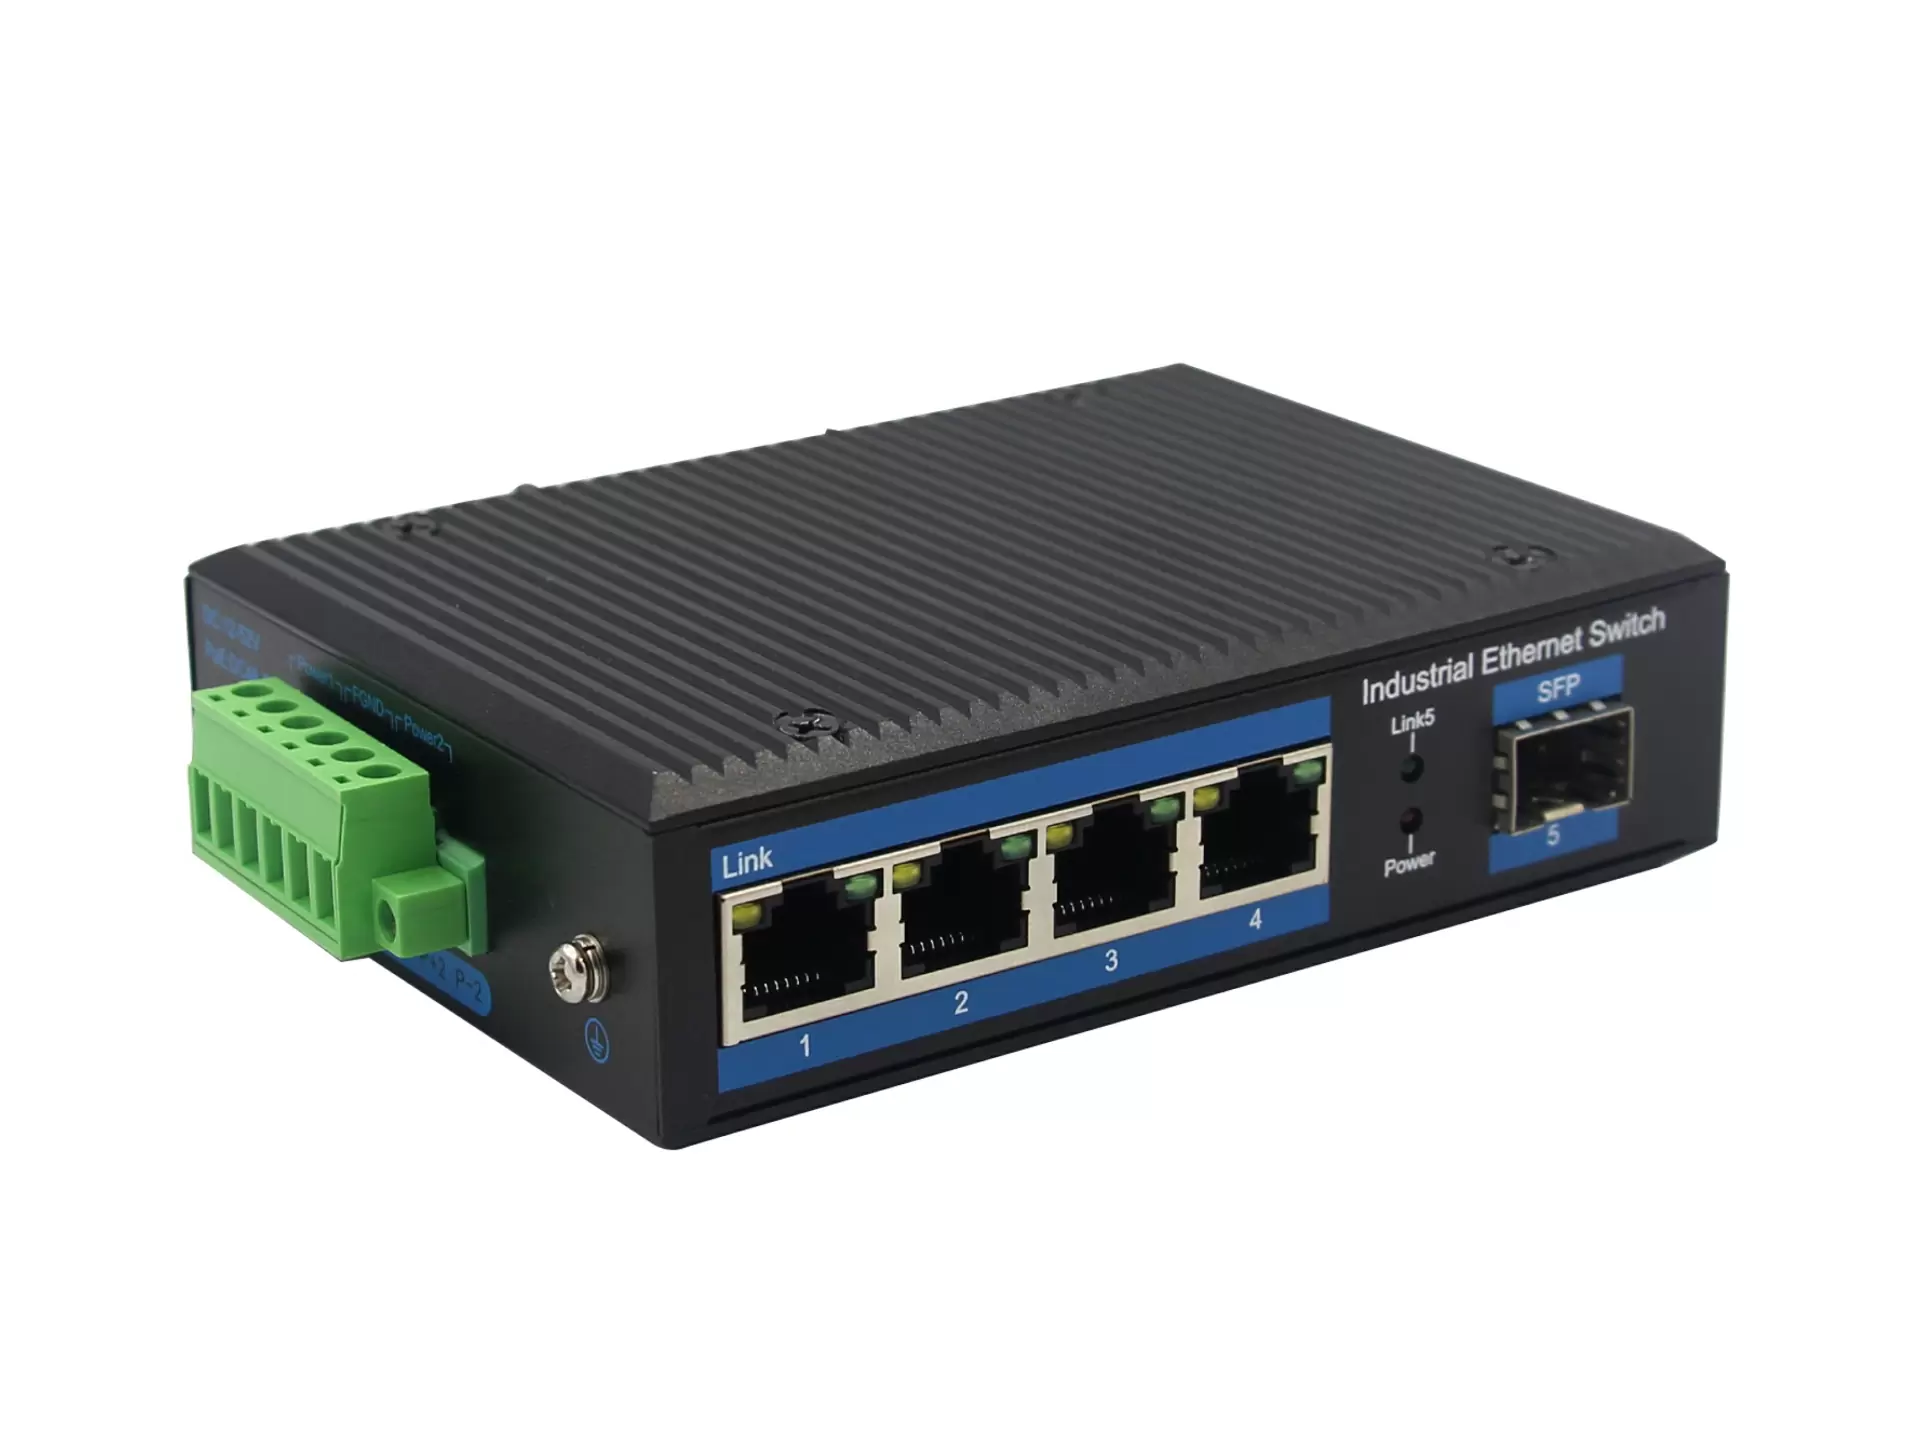 How Does a 4-Port Ethernet Switch Improve Network Connectivity?